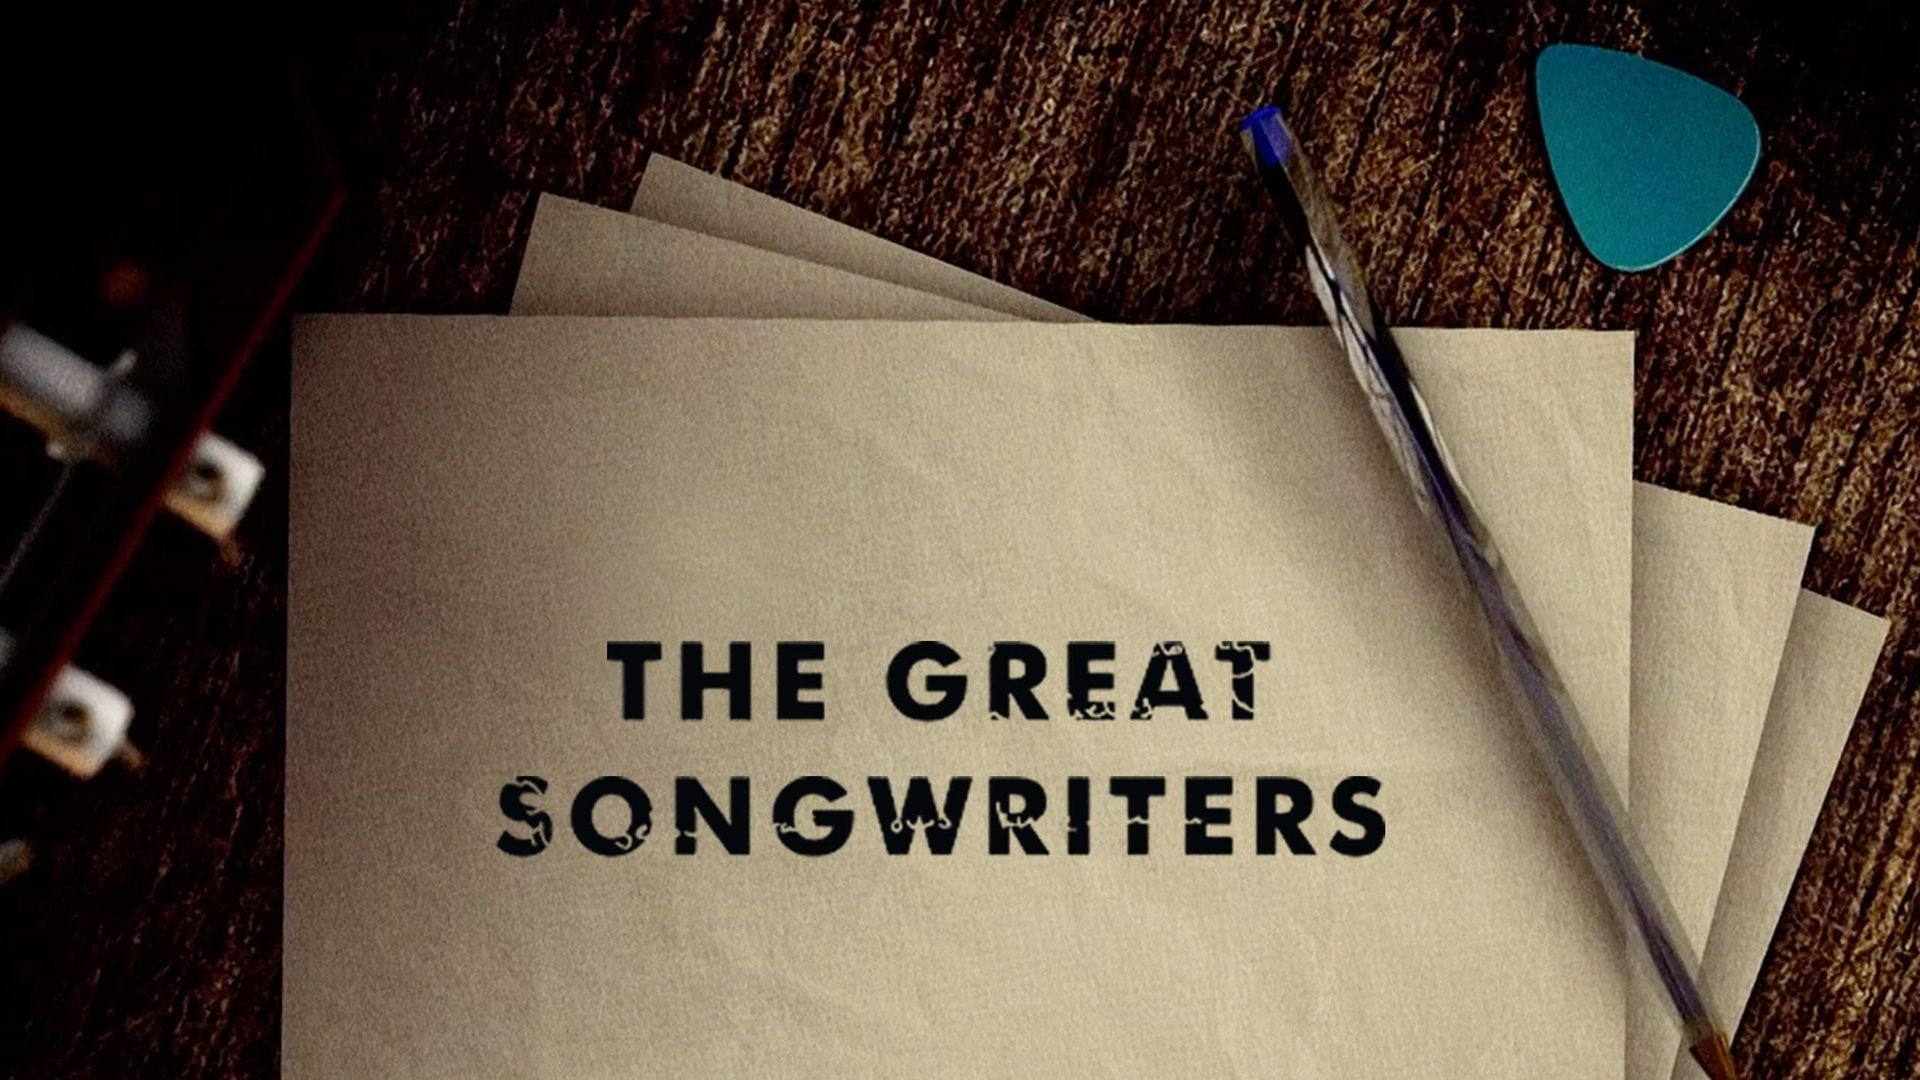 The Great Songwriters background